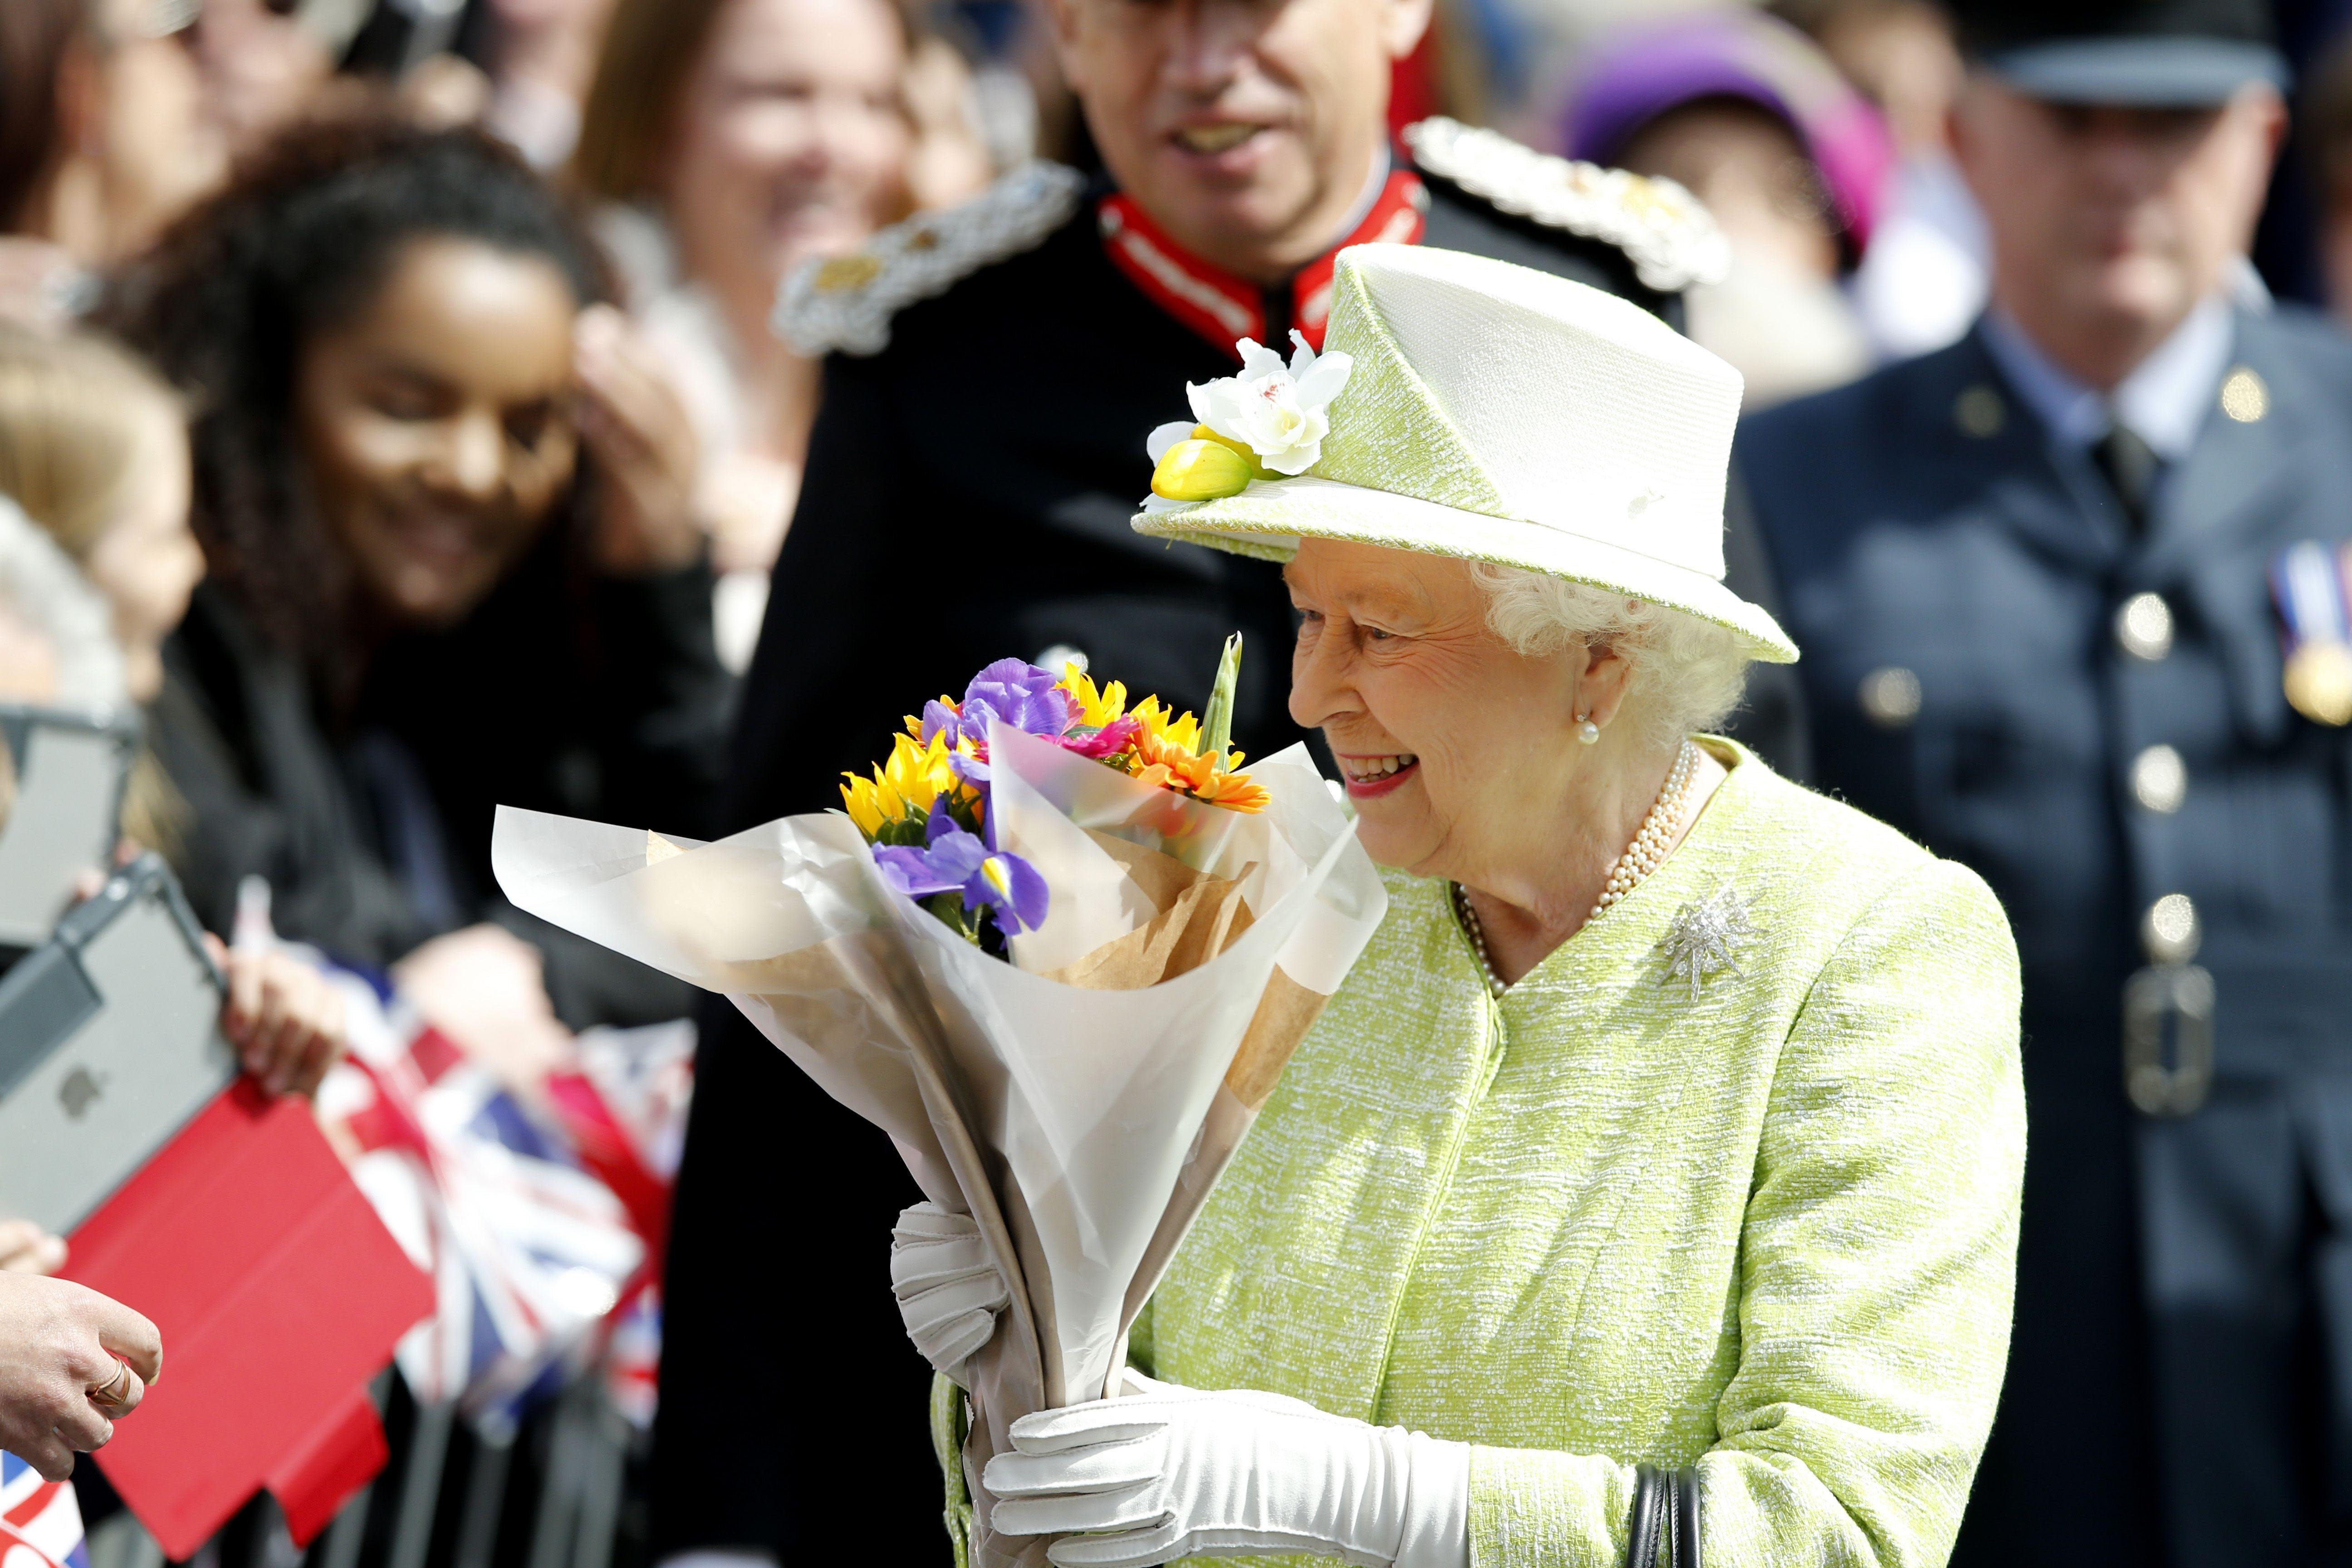 Queen Elizabeth Ii Turns 90 Years Old Adding Another Milestone To Her 64 Year Reign Video